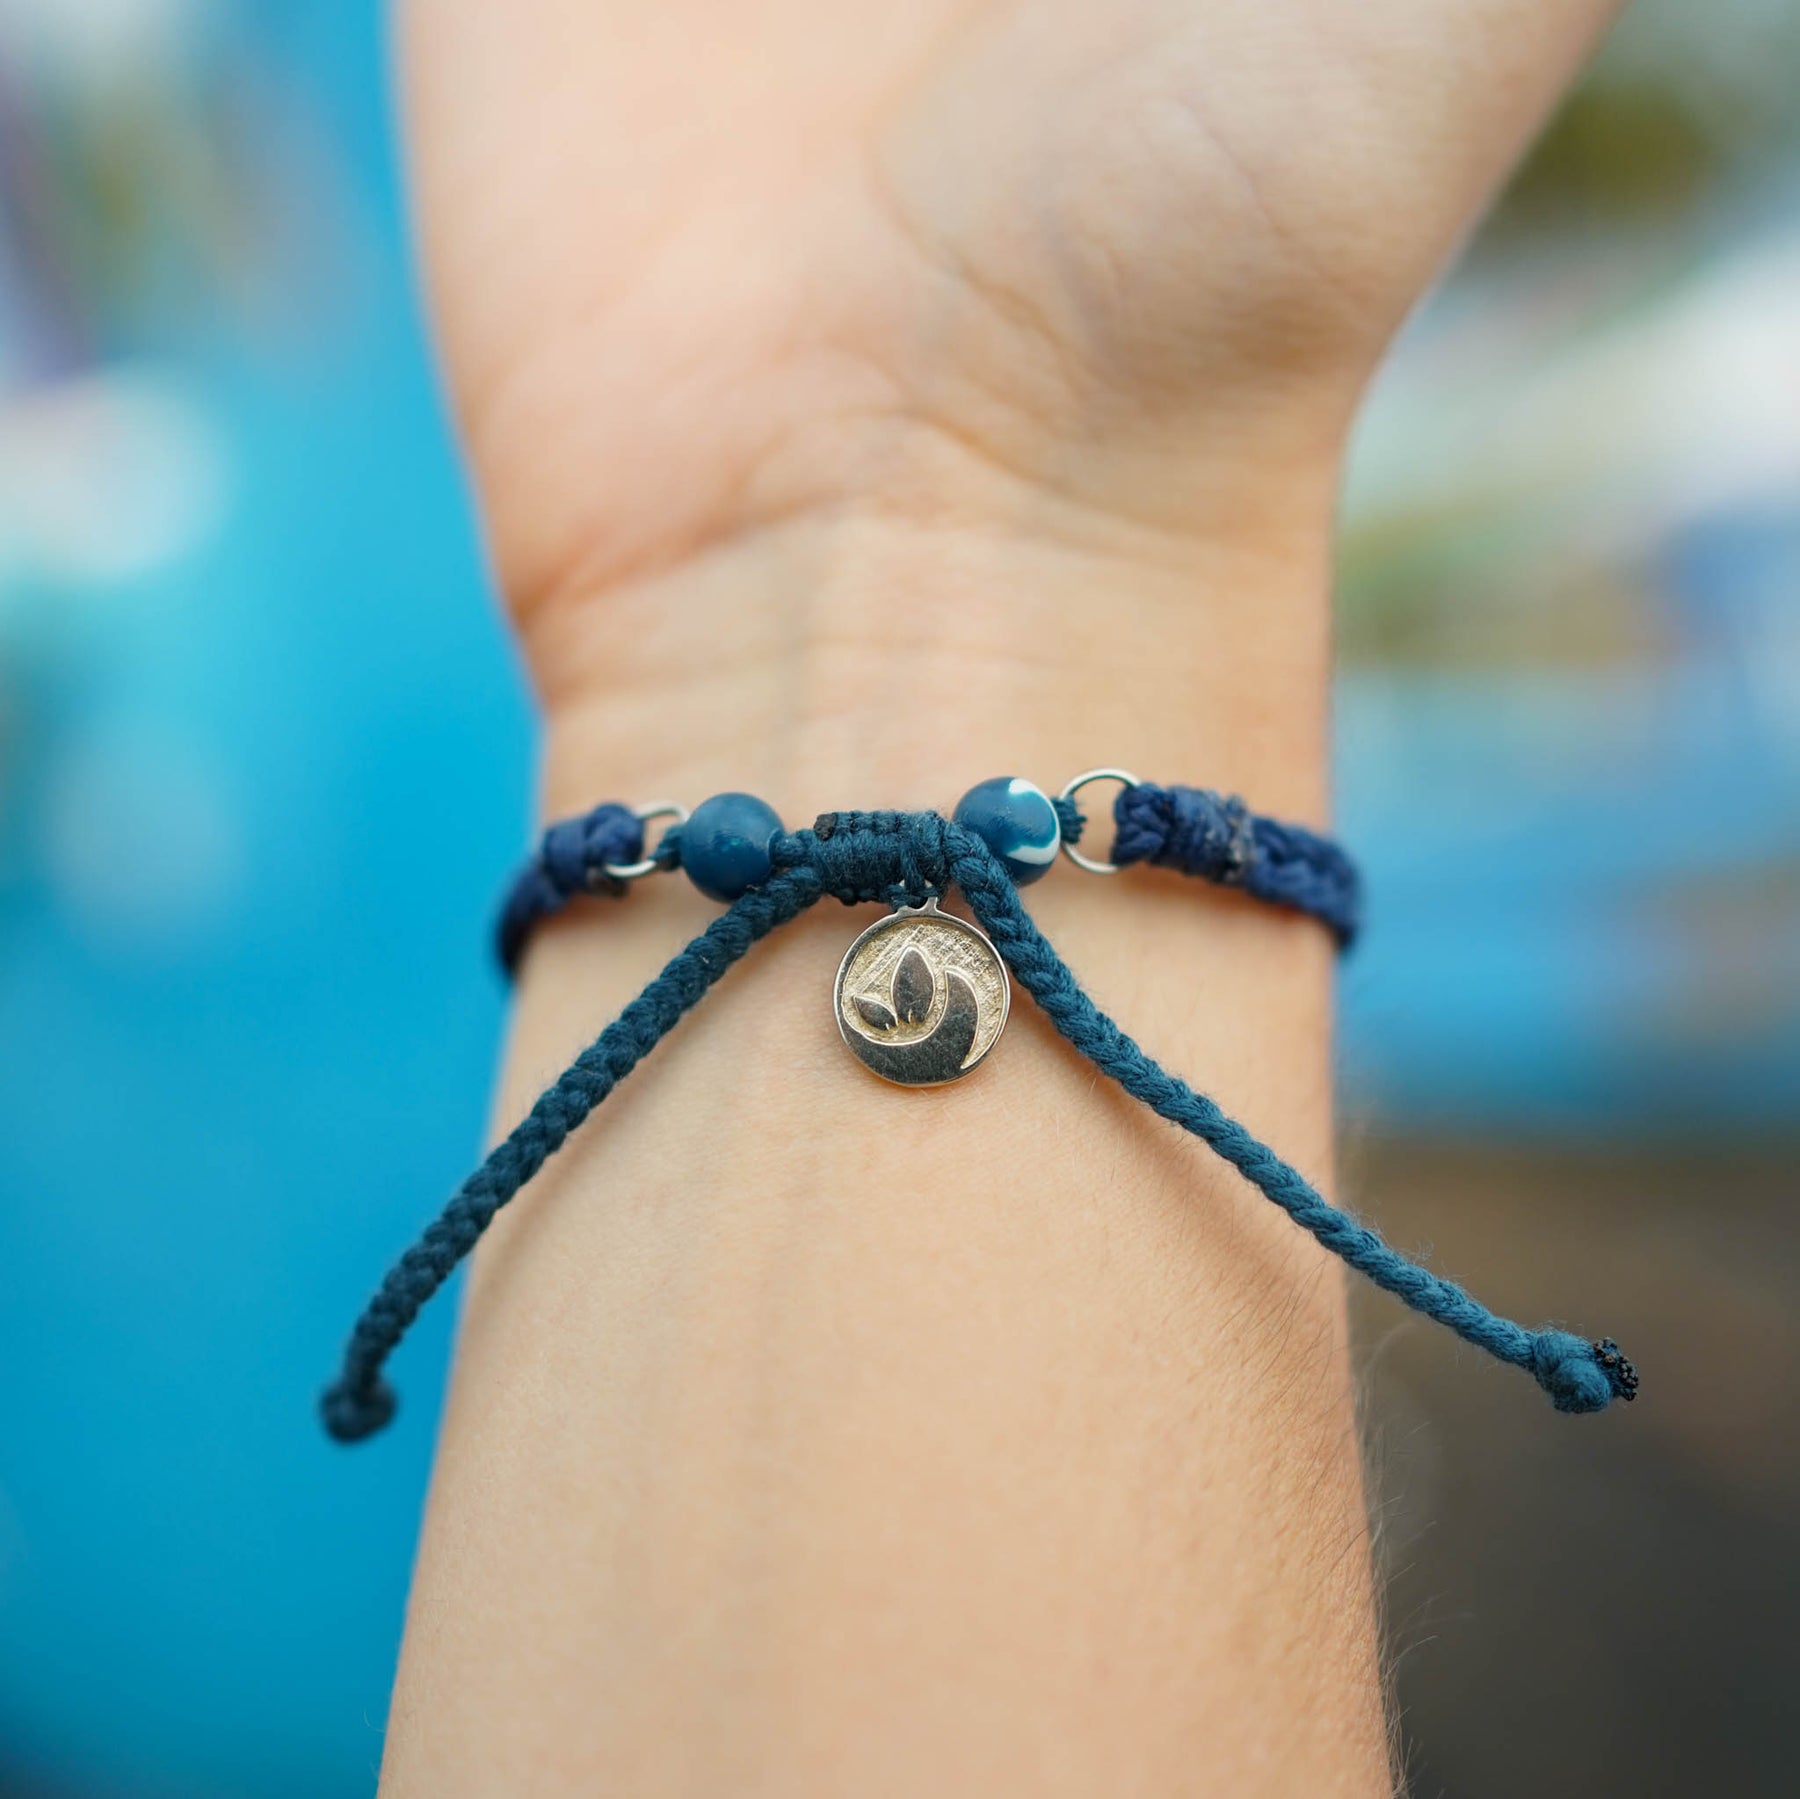 Oceanmata Armband "Limited Dolphin Edition"